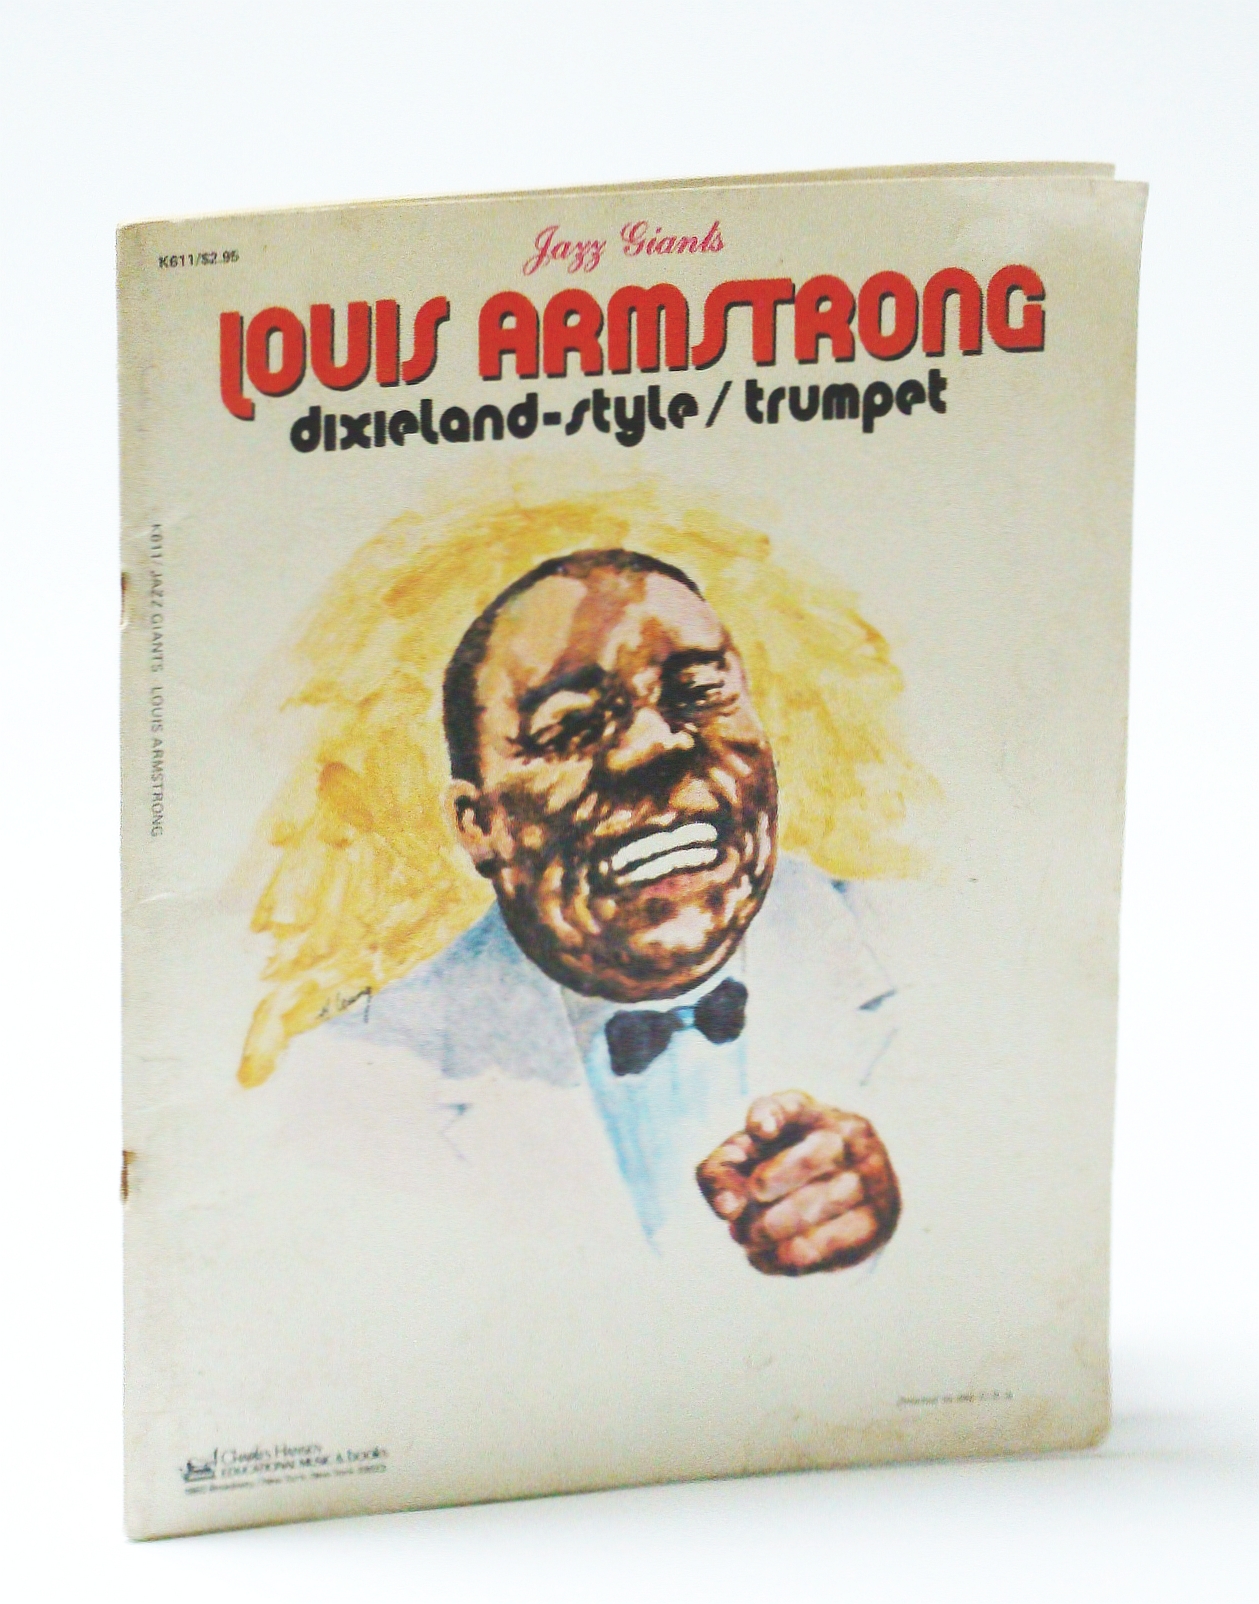 Louis Armstrong - Jazz Giants: Dixieland-Style: Trumpte Sheet Music by Armstrong, Louis; al, et ...